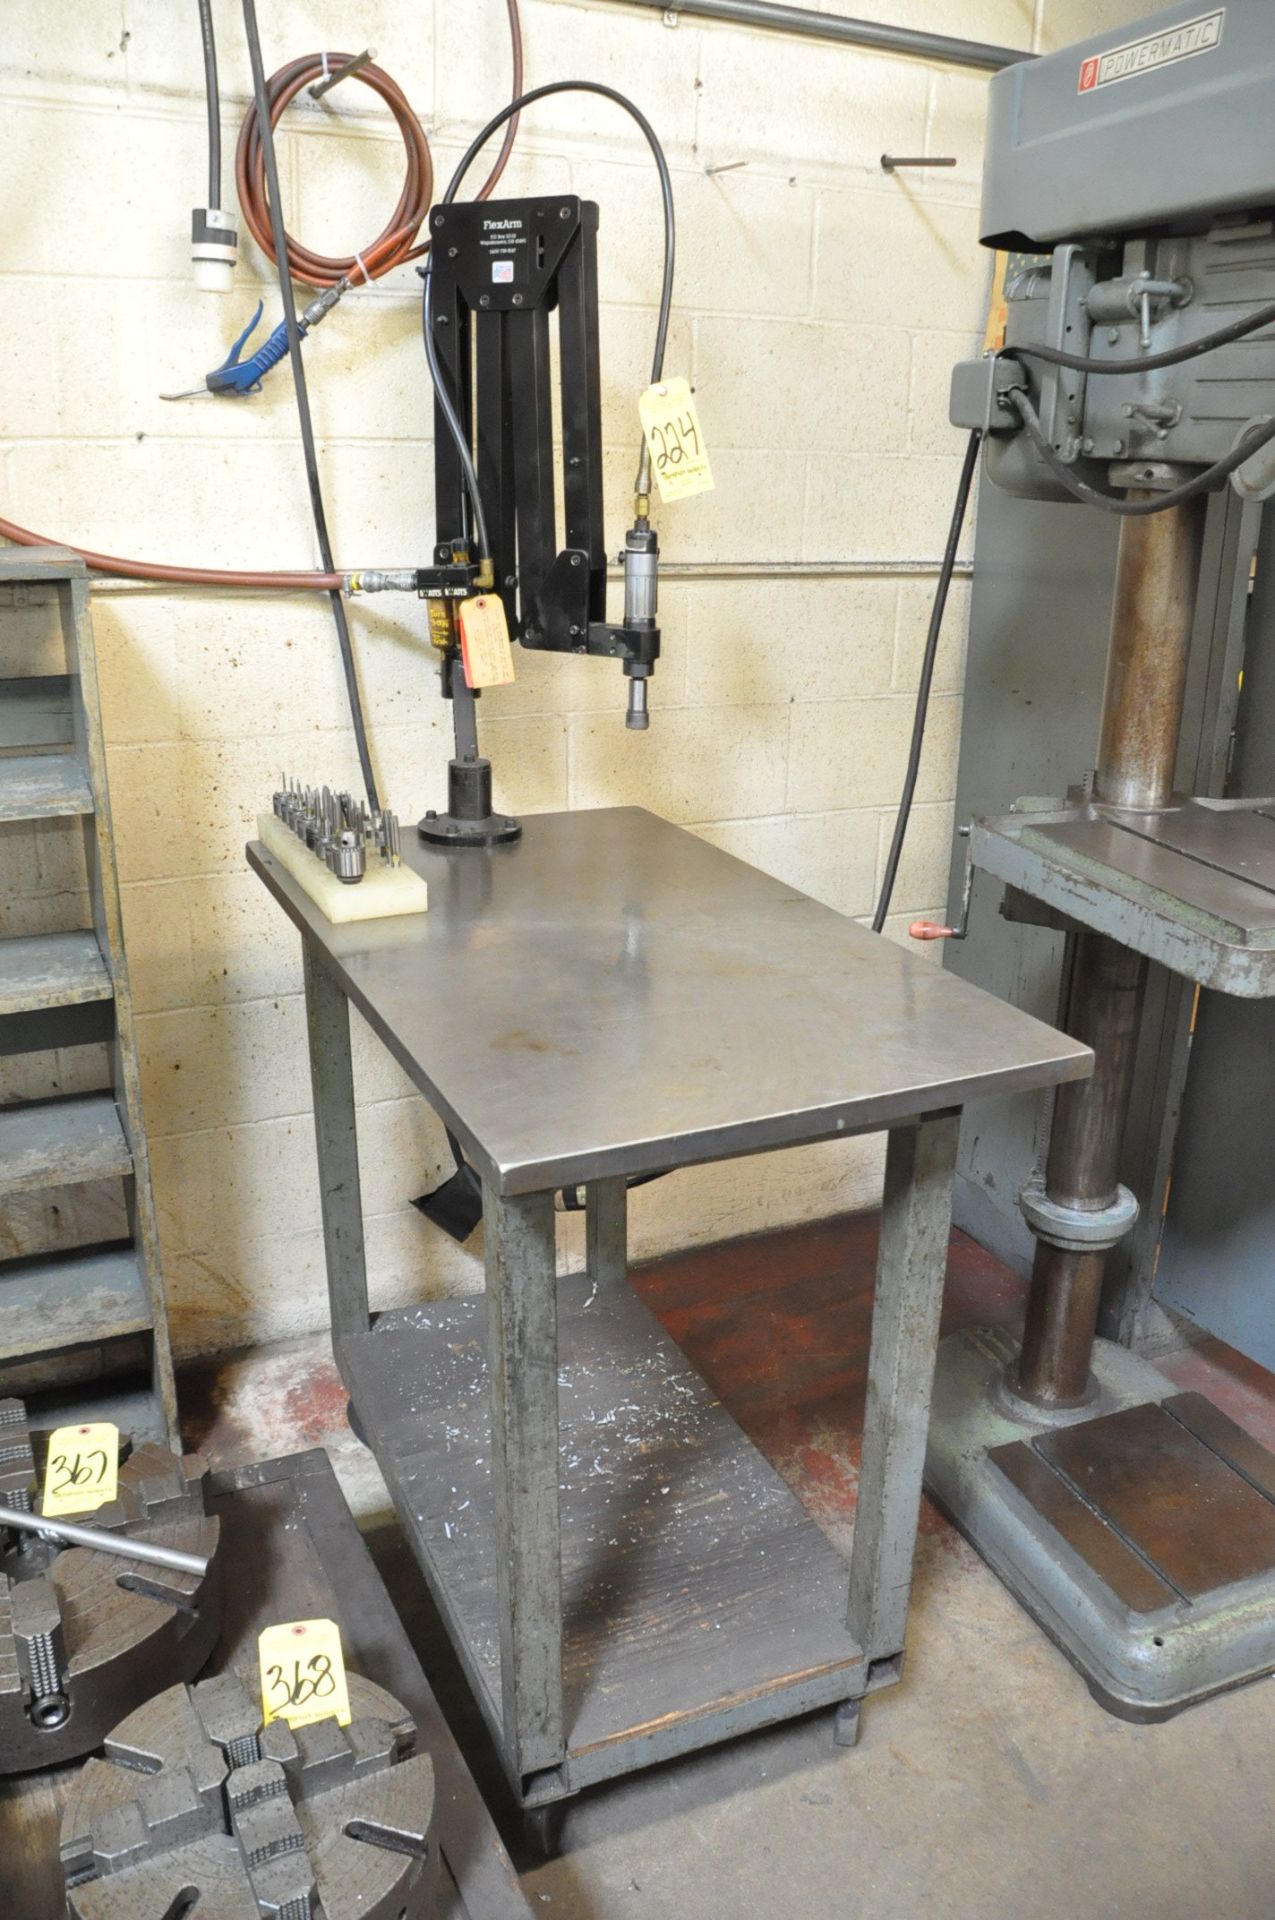 FlexArm Articulating Arm Pneumatic Tapping Station, S/n N/a, Mounted on 22" x 38" x 1" Steel Top